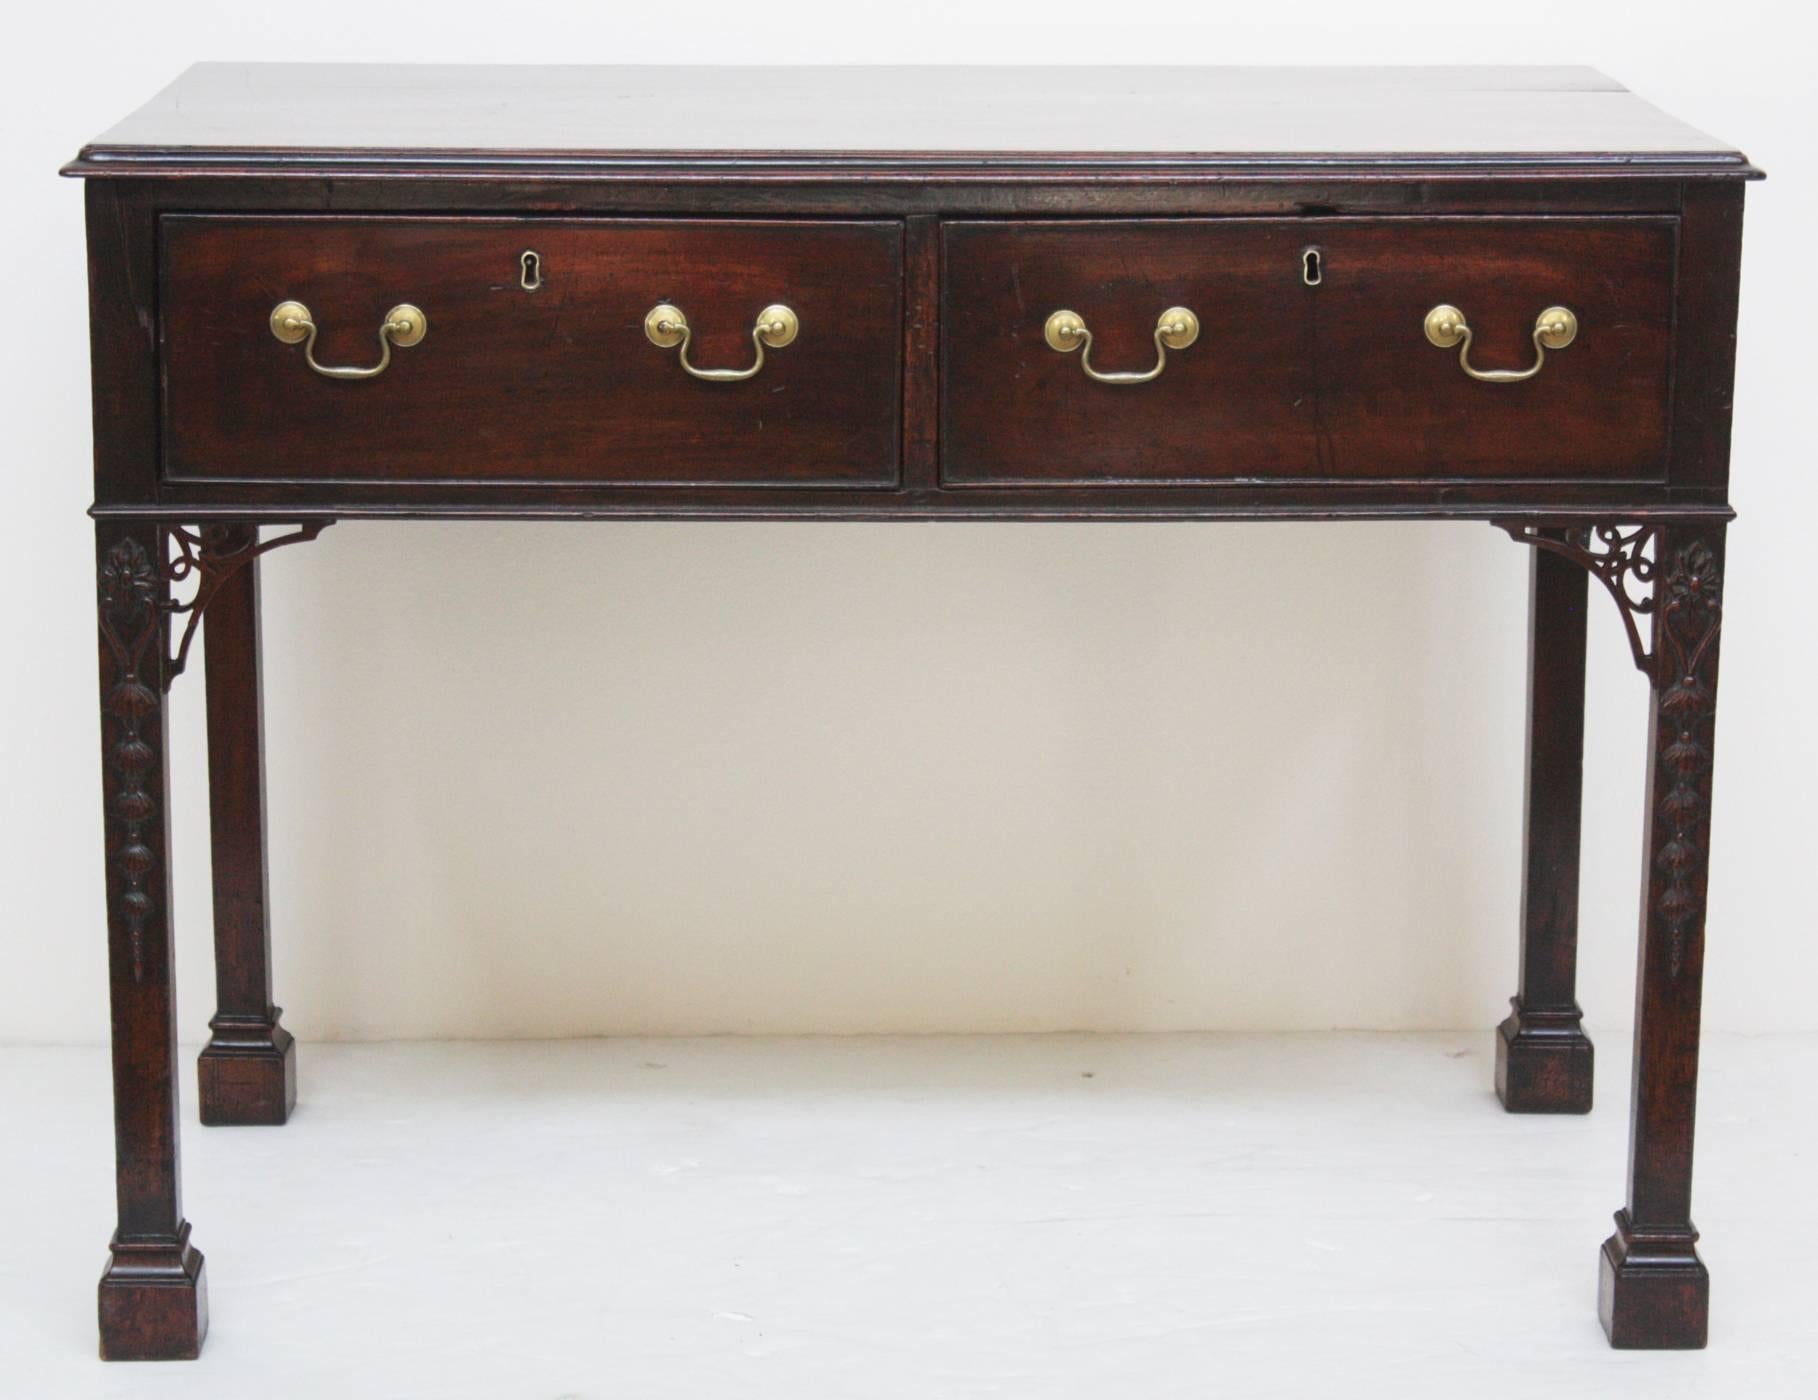 Period Georgian, handsome Chippendale style serving table, mahogany case with two (2) generous cockbeaded drawers with locks (one missing / No Key), each with two brass bale handles and keyhole escutcheons, straight Marlborough legs with open